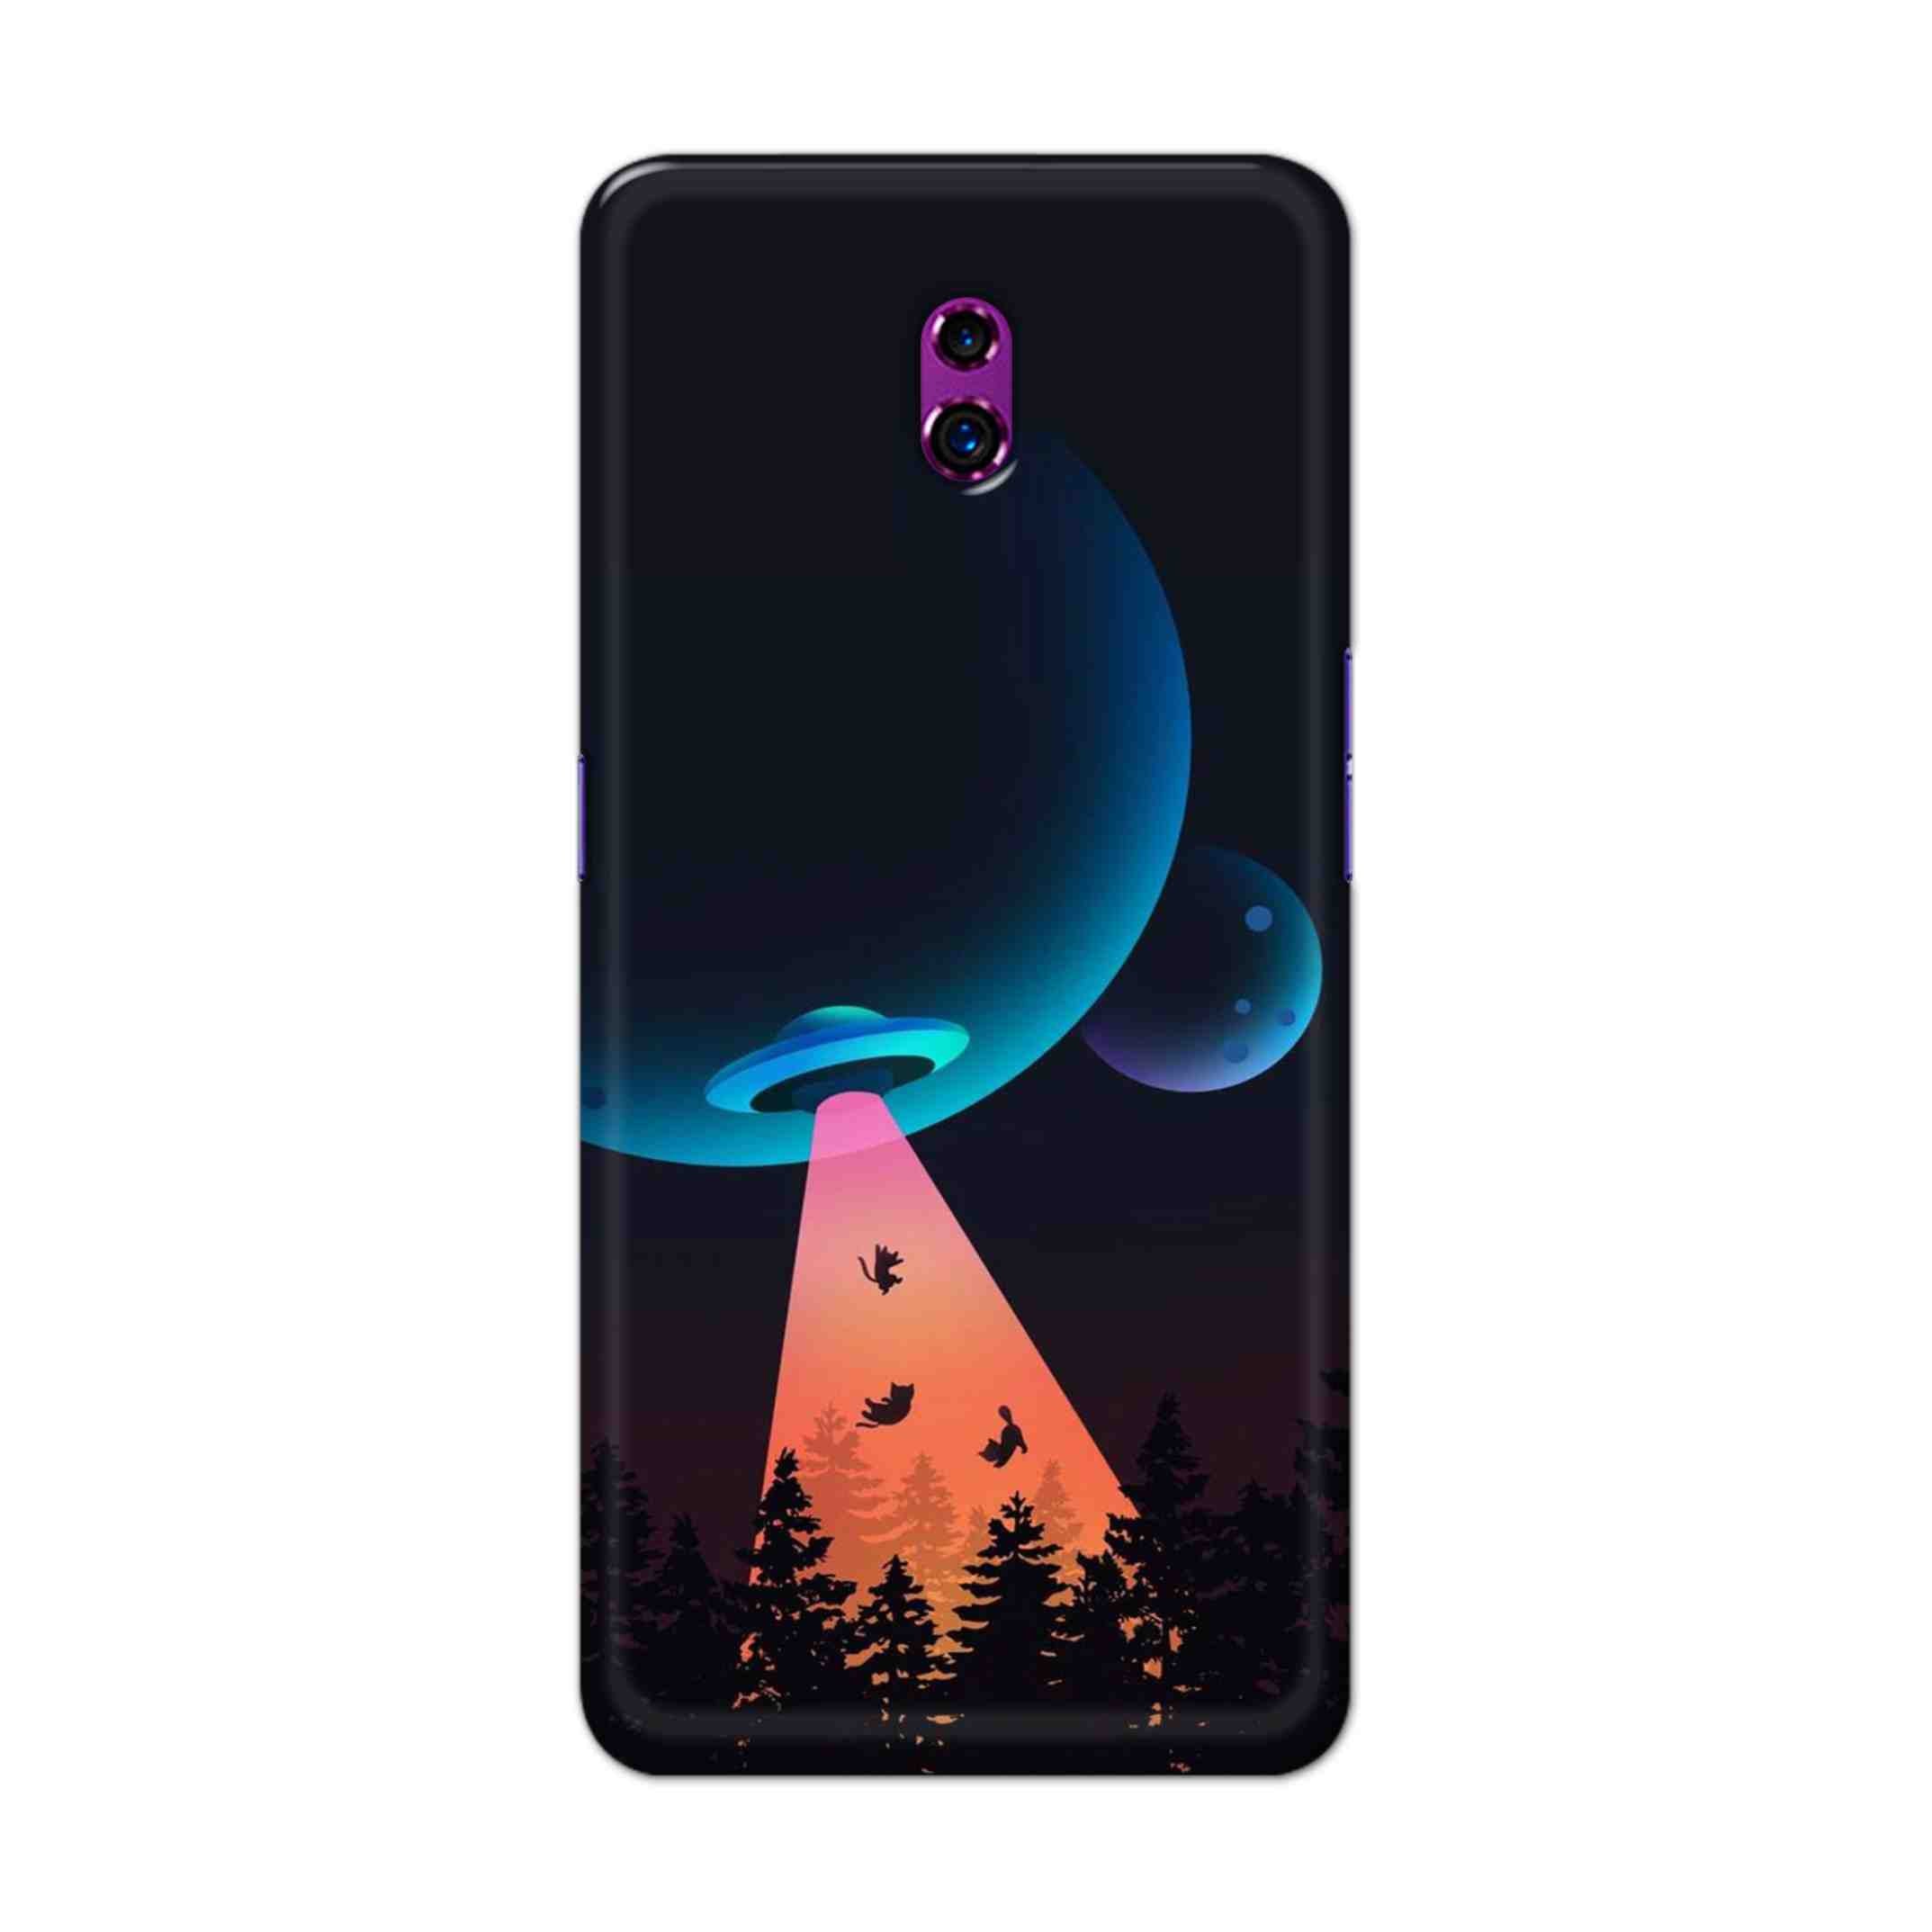 Buy Spaceship Hard Back Mobile Phone Case Cover For Oppo Reno Online